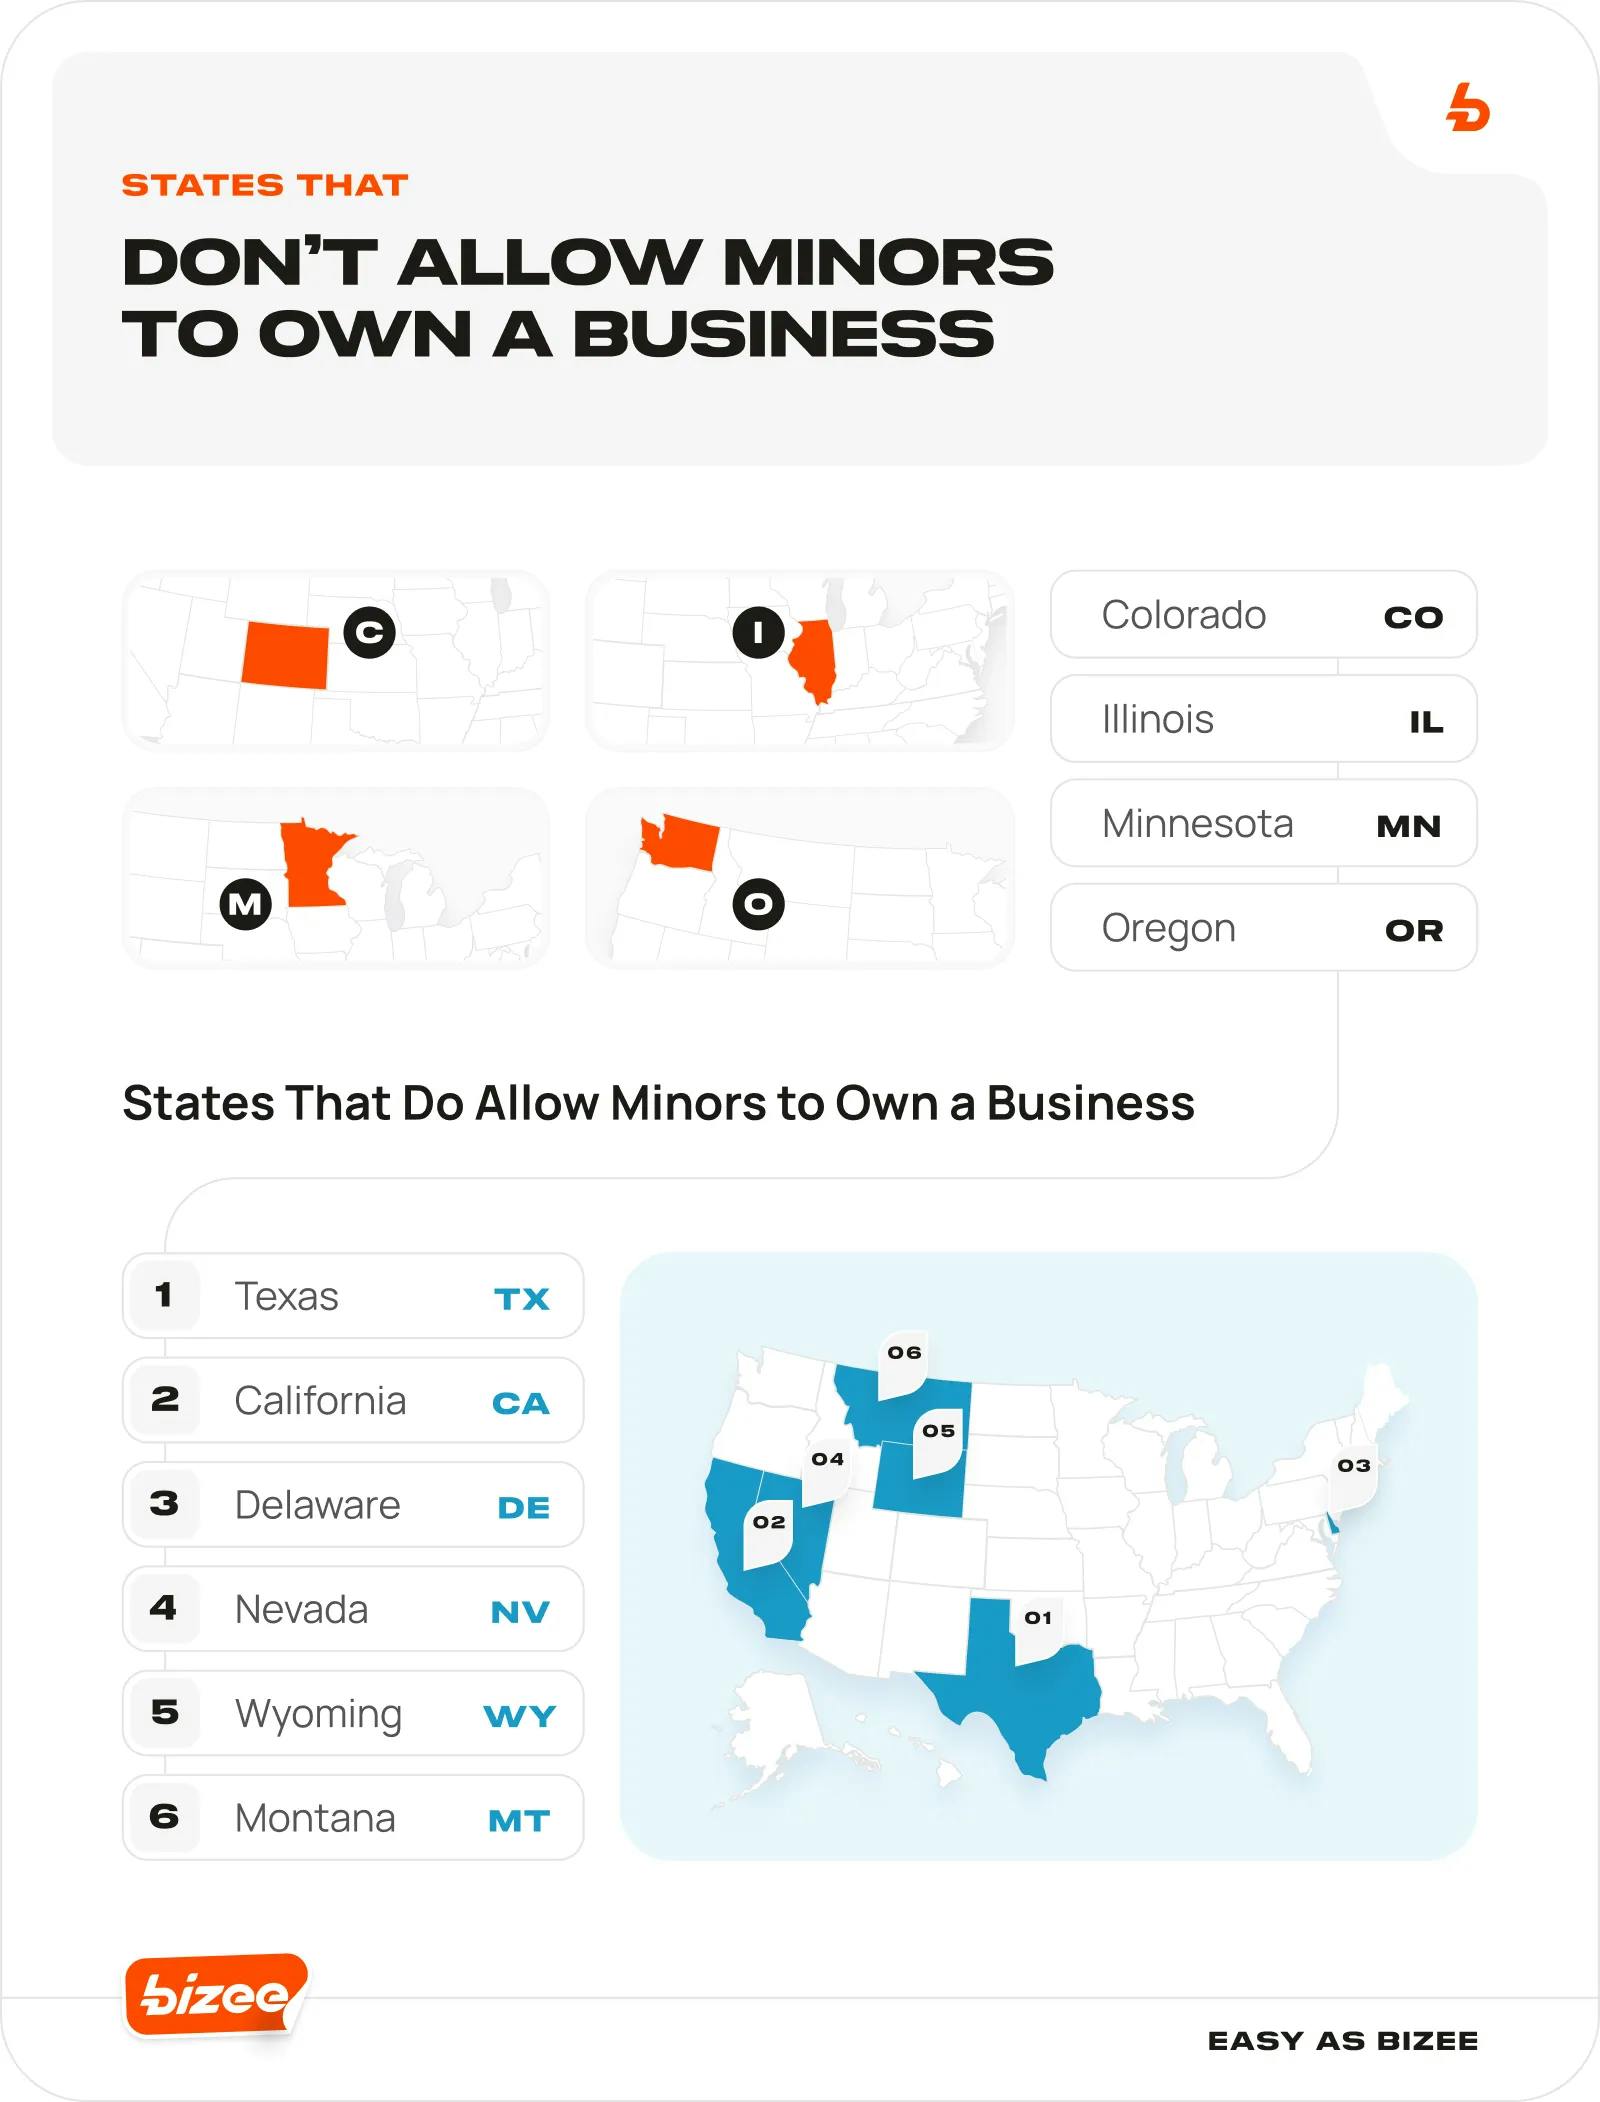 States That Don’t Allow Minors to Own a Business